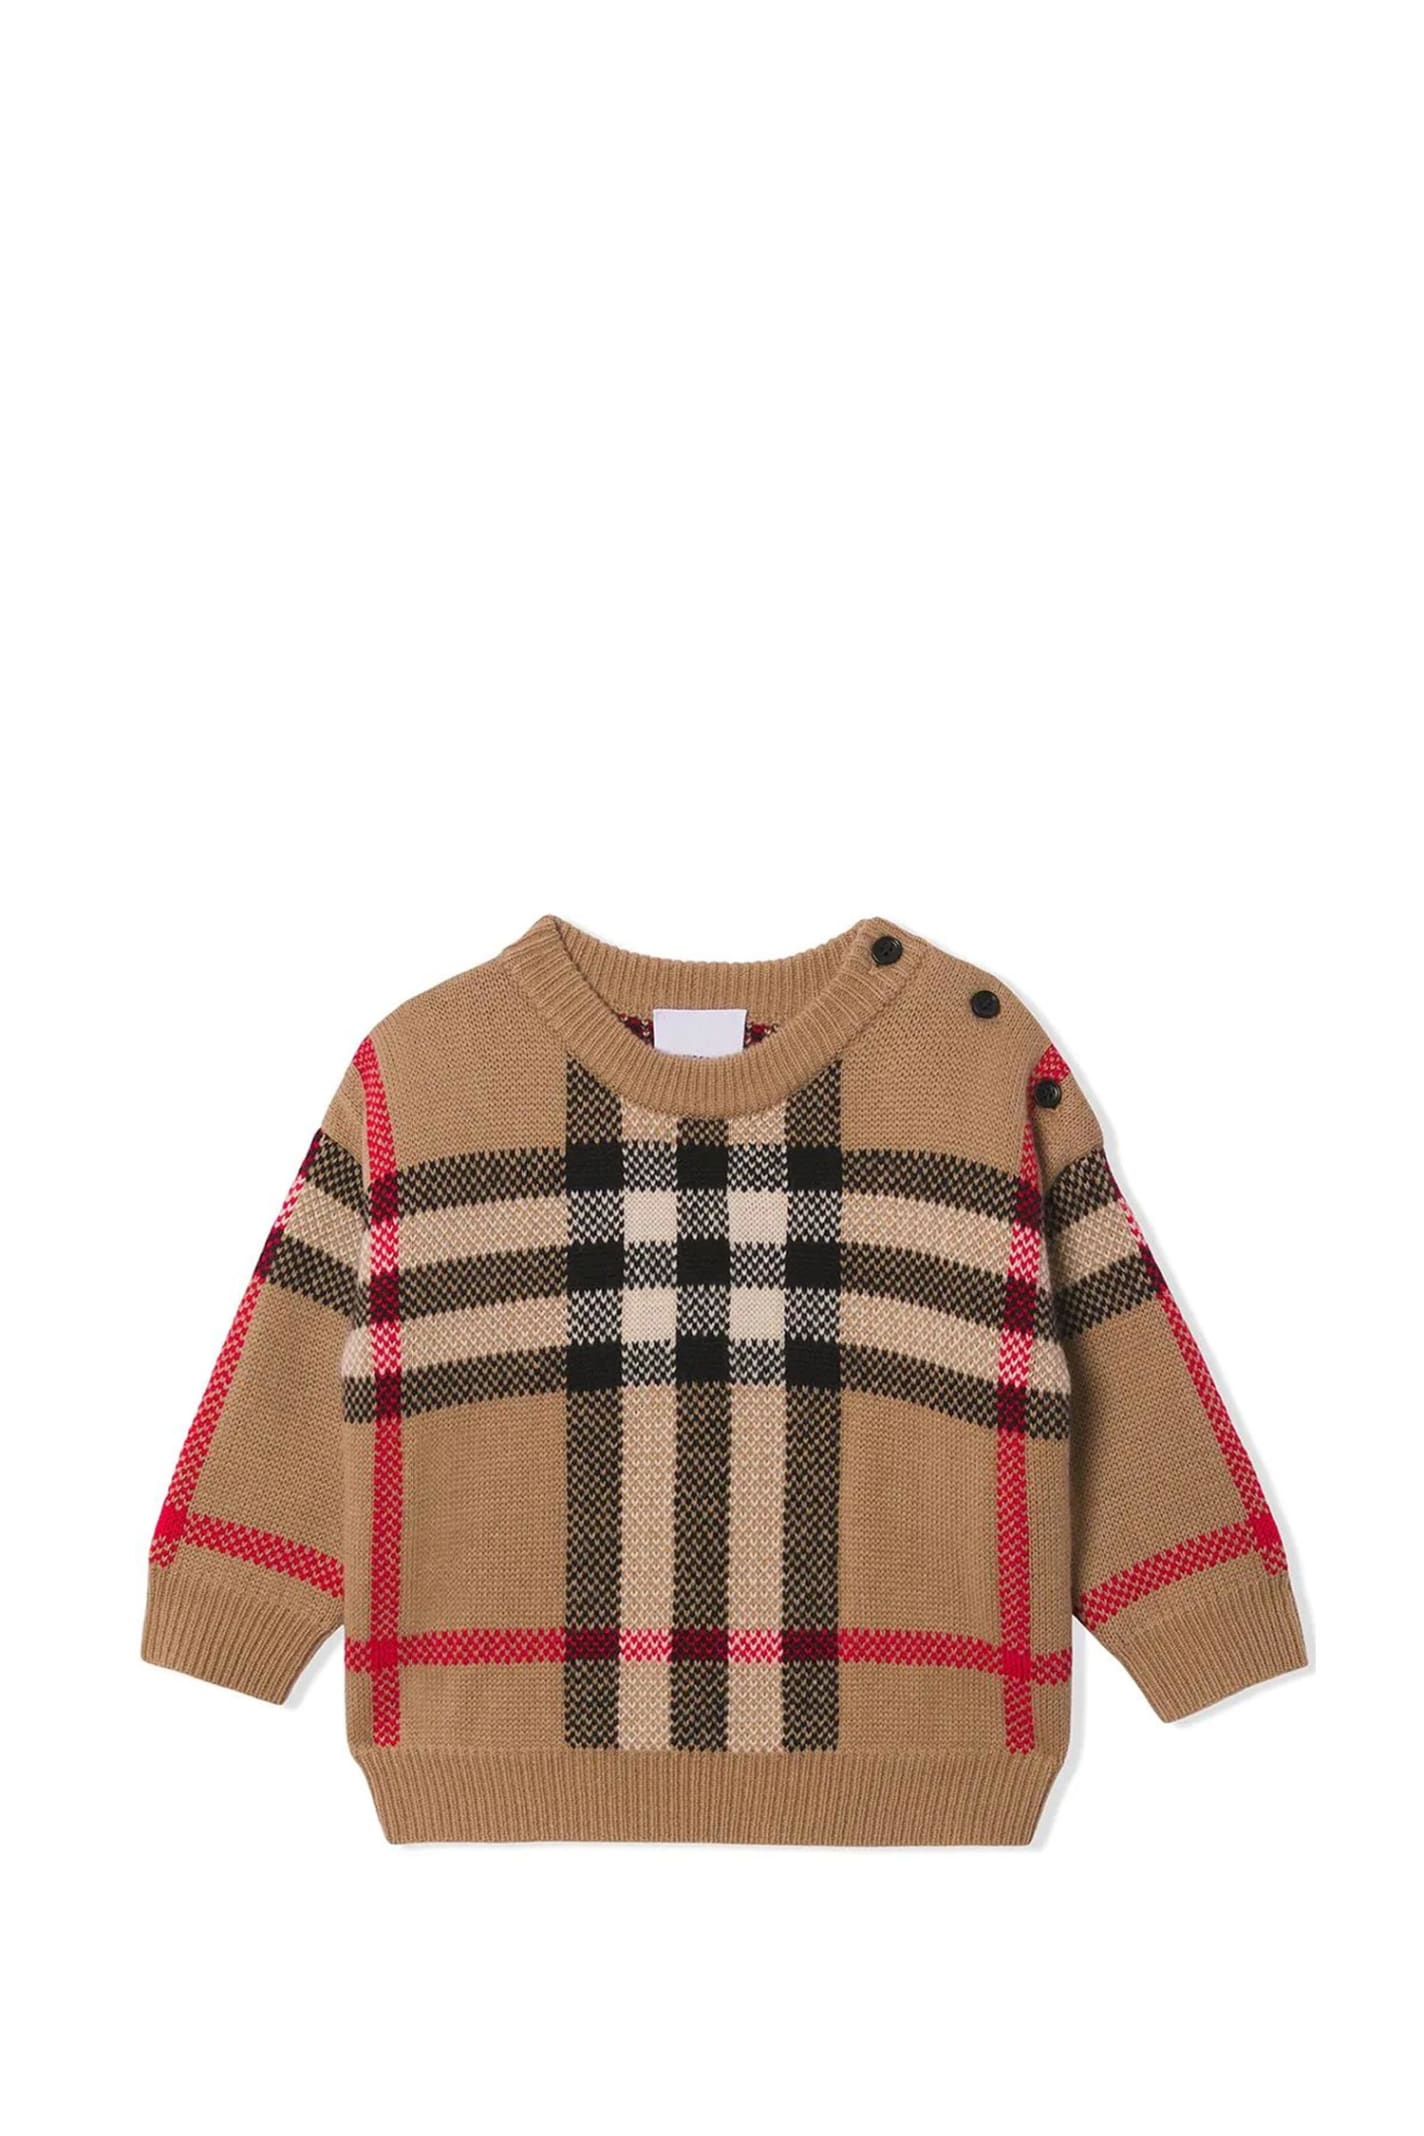 Burberry Kids' Sweater With Check Pattern In Beige